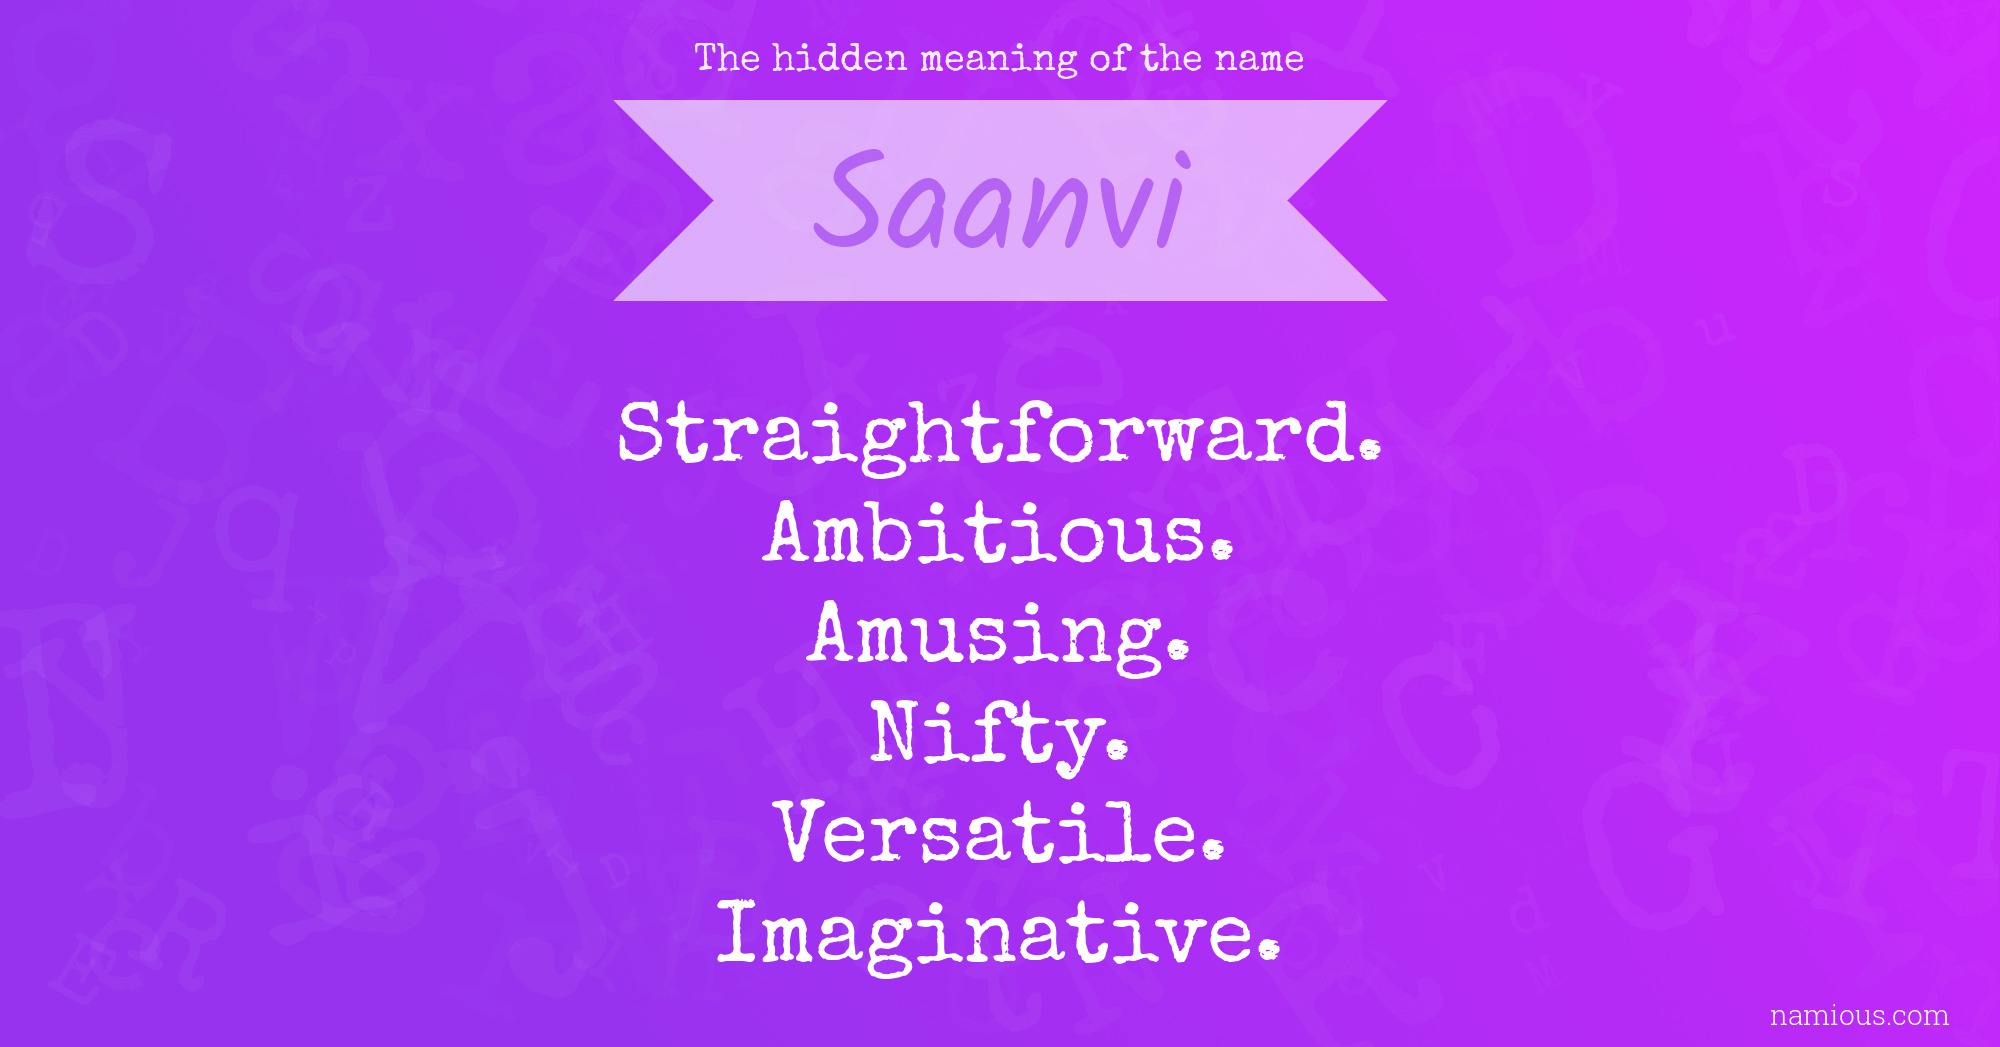 The hidden meaning of the name Saanvi